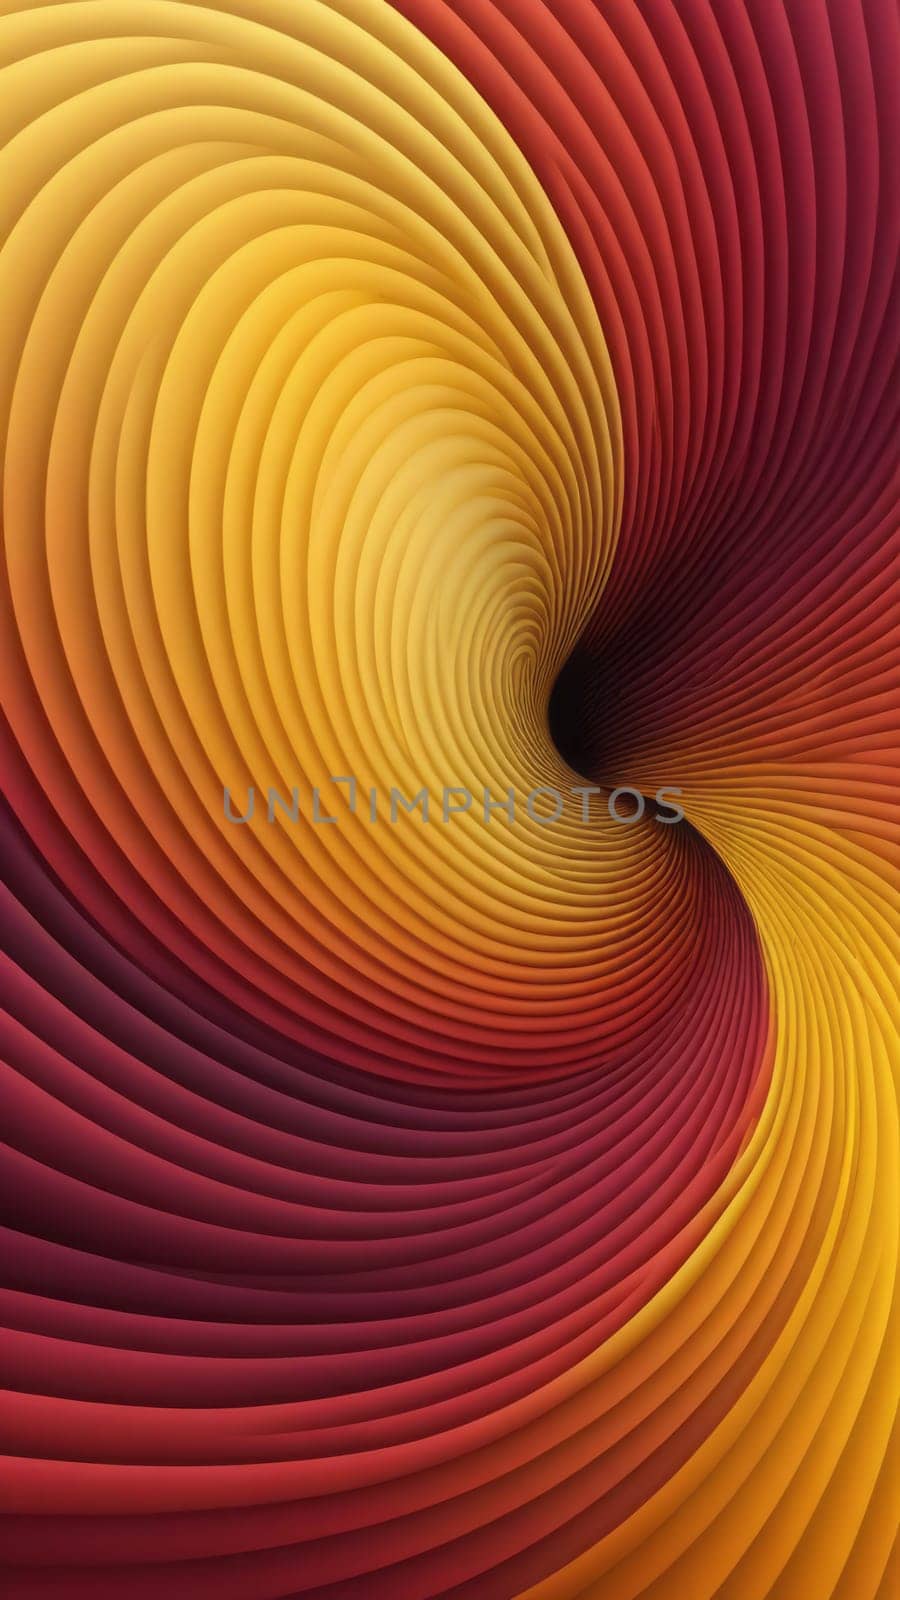 Screen background from Spiral shapes and maroon by nkotlyar